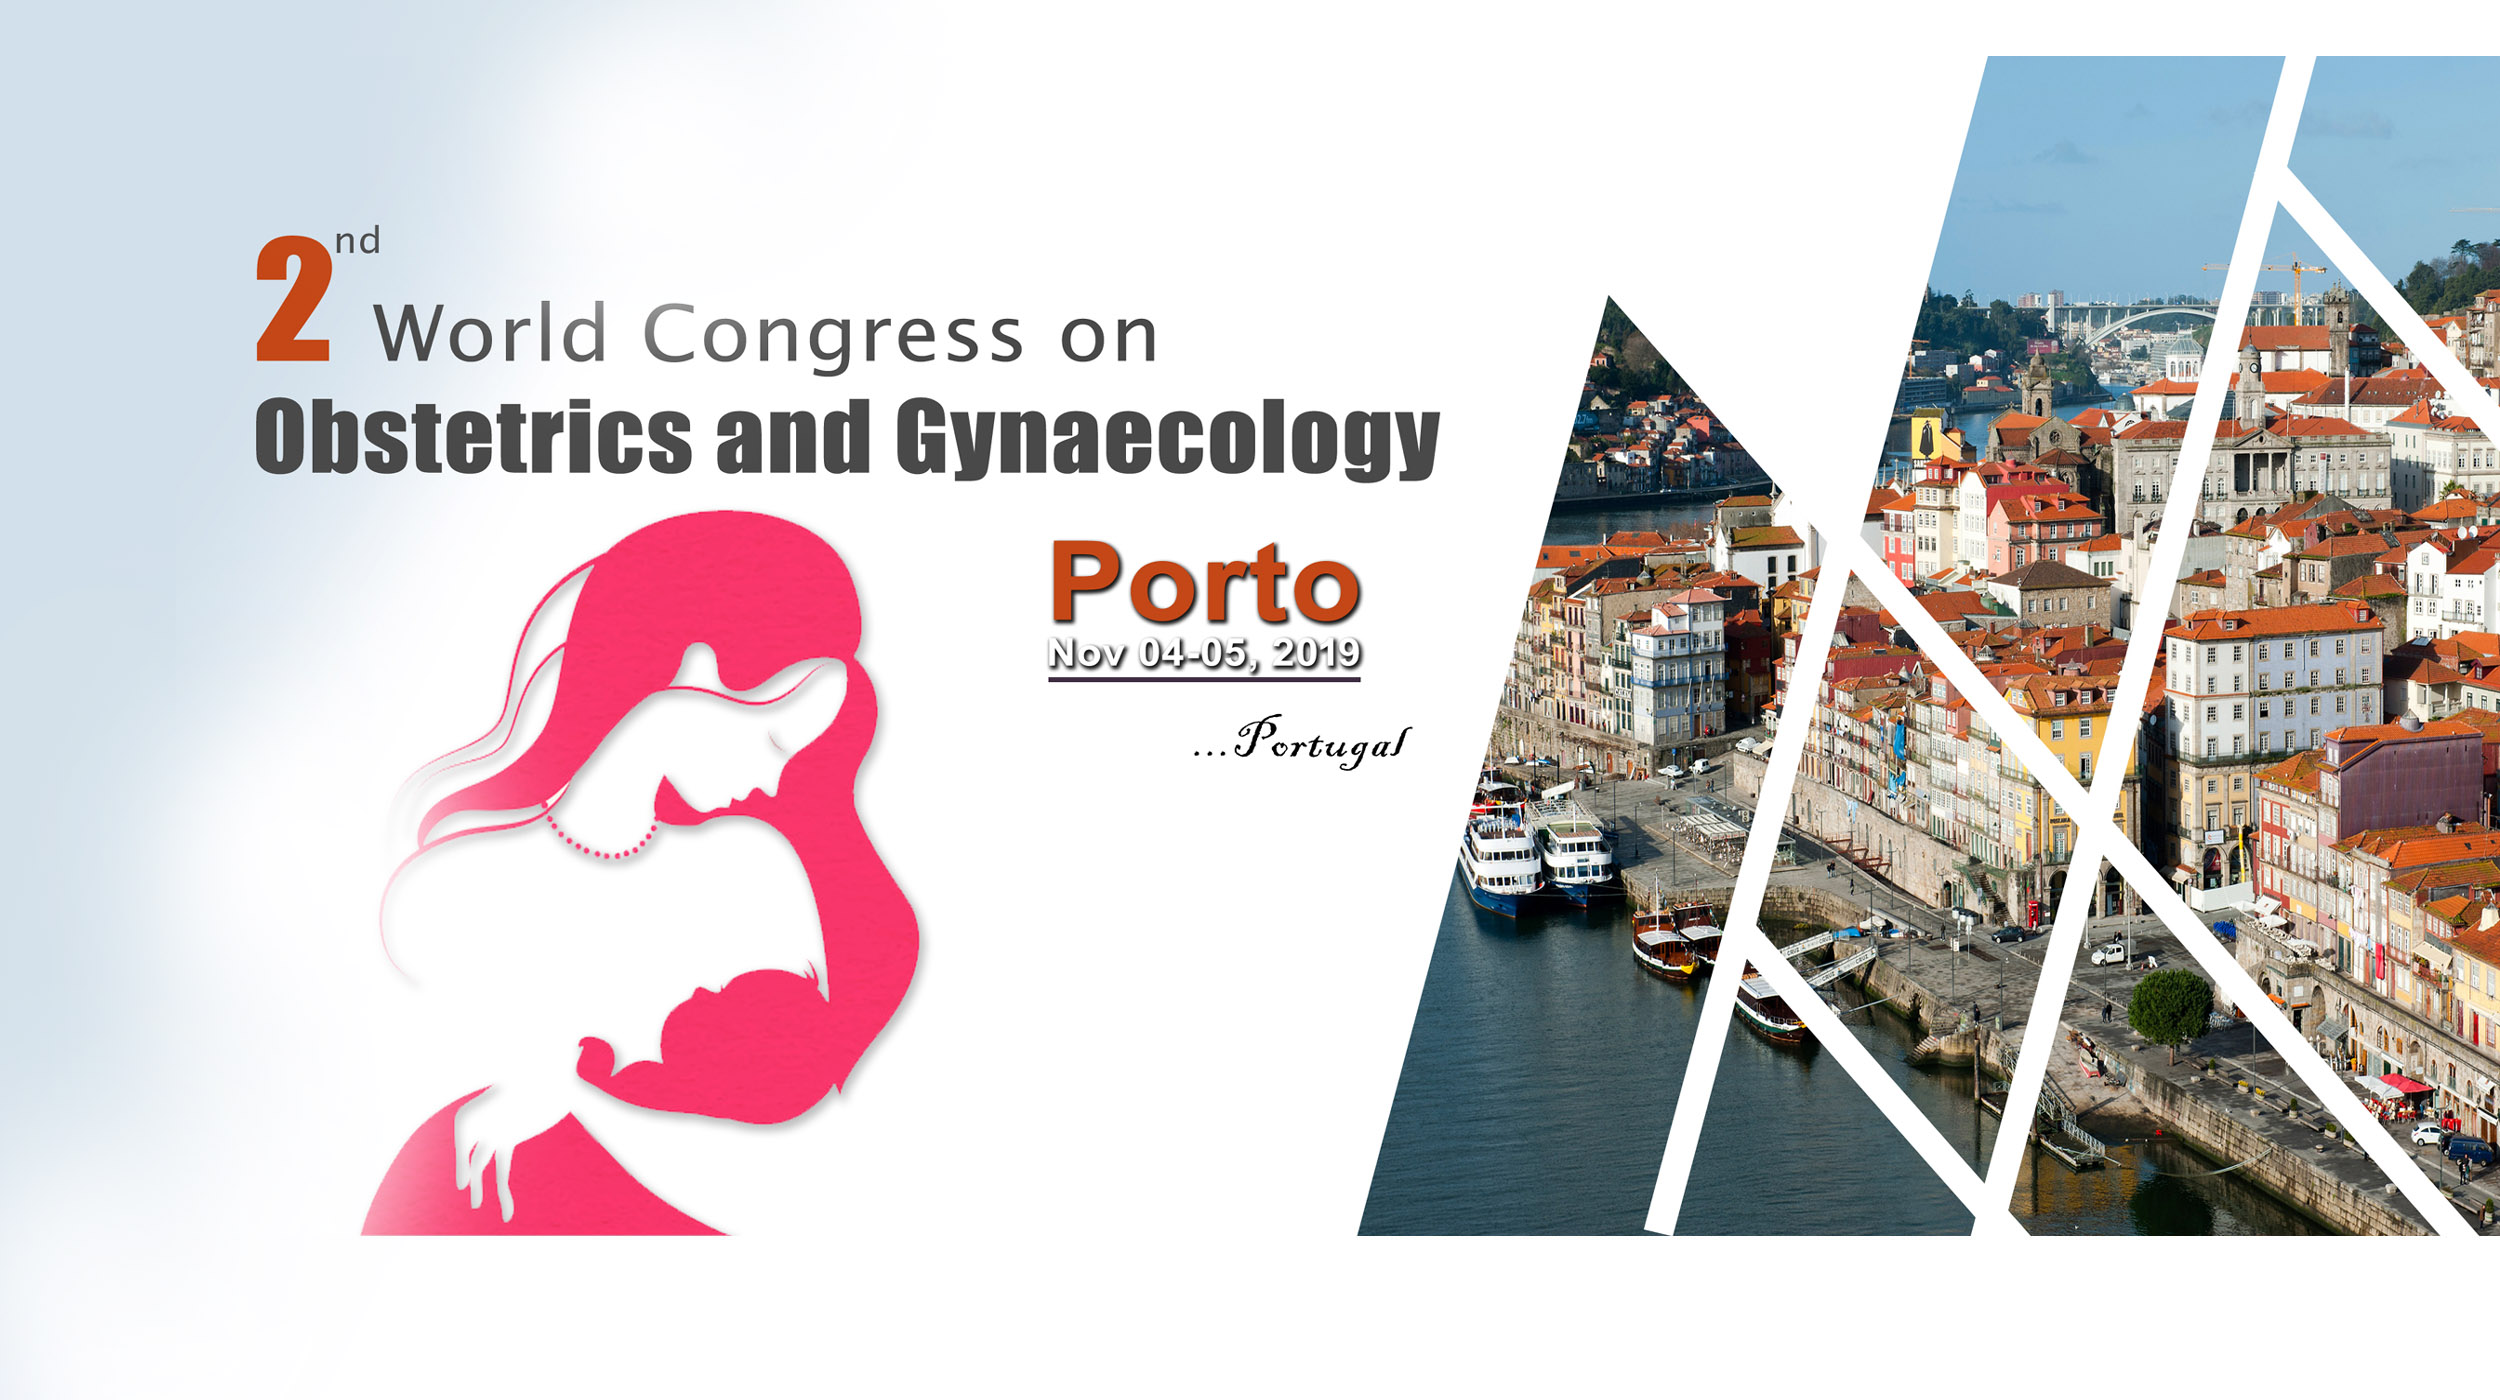 2nd World Congress on Obstetrics and Gynaecology